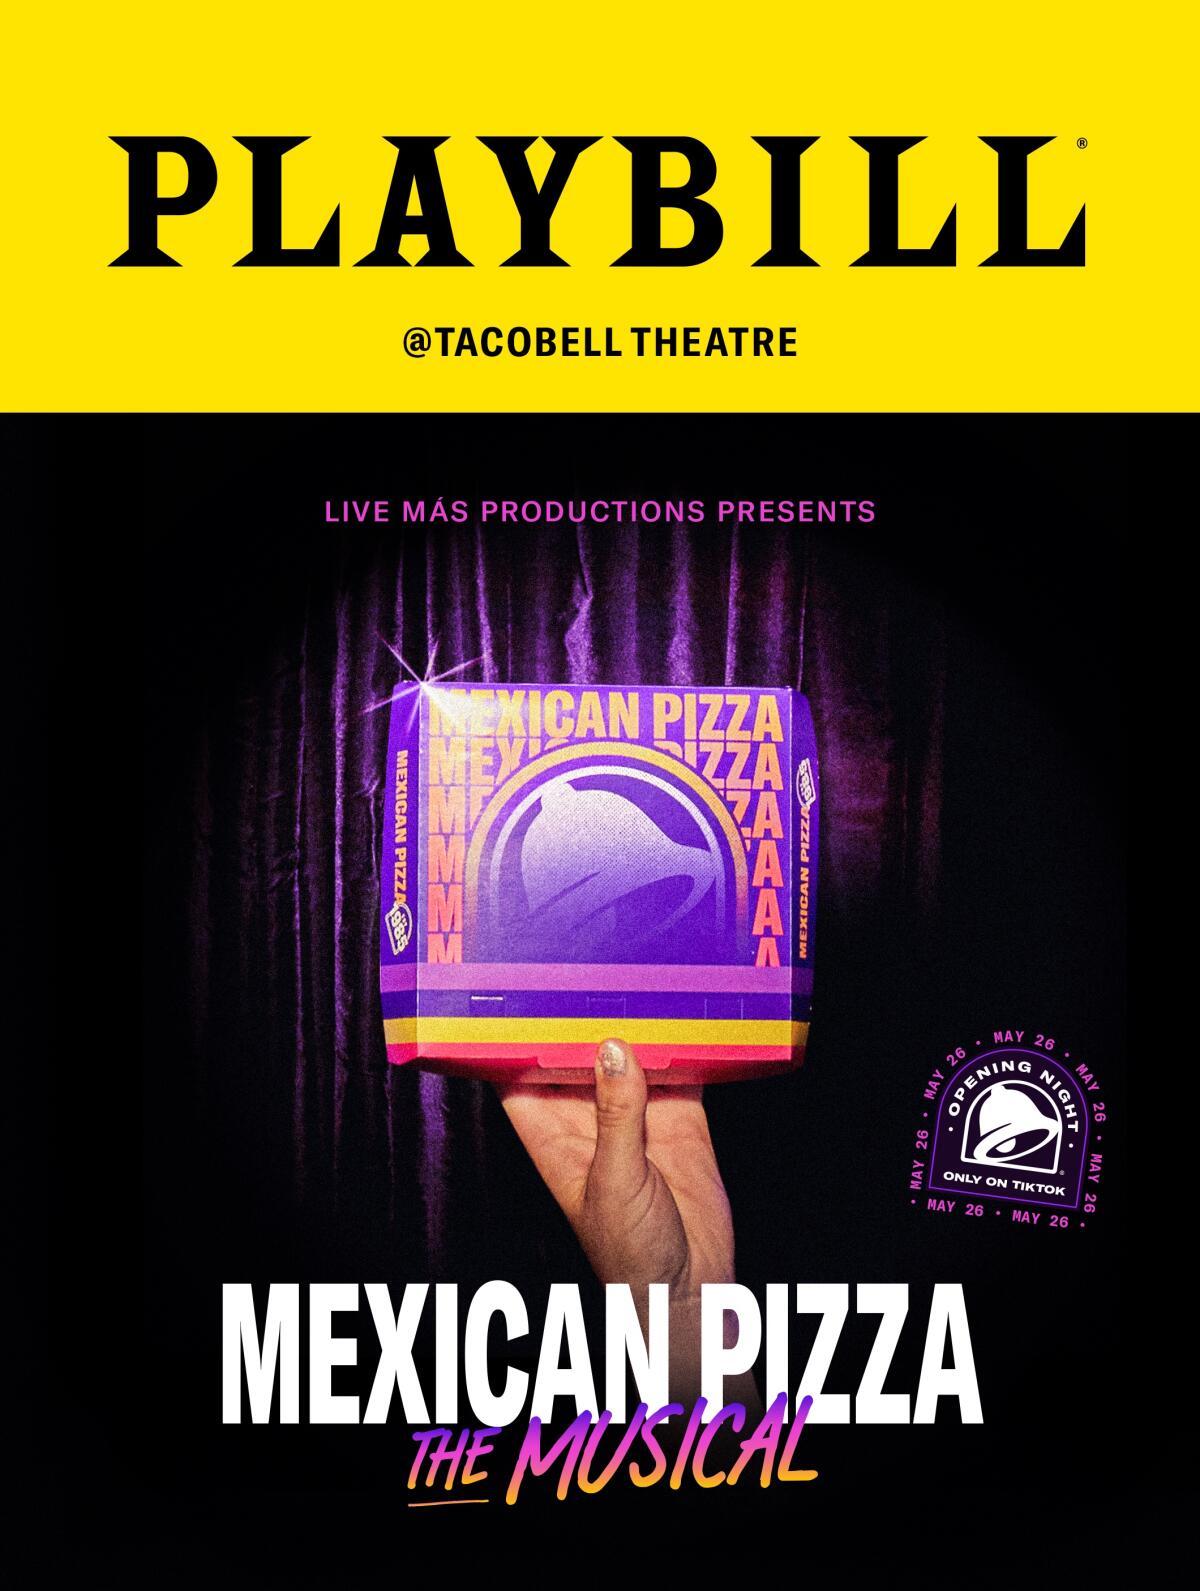 A faux Playbill shows a hand holding a Mexican Pizza box.